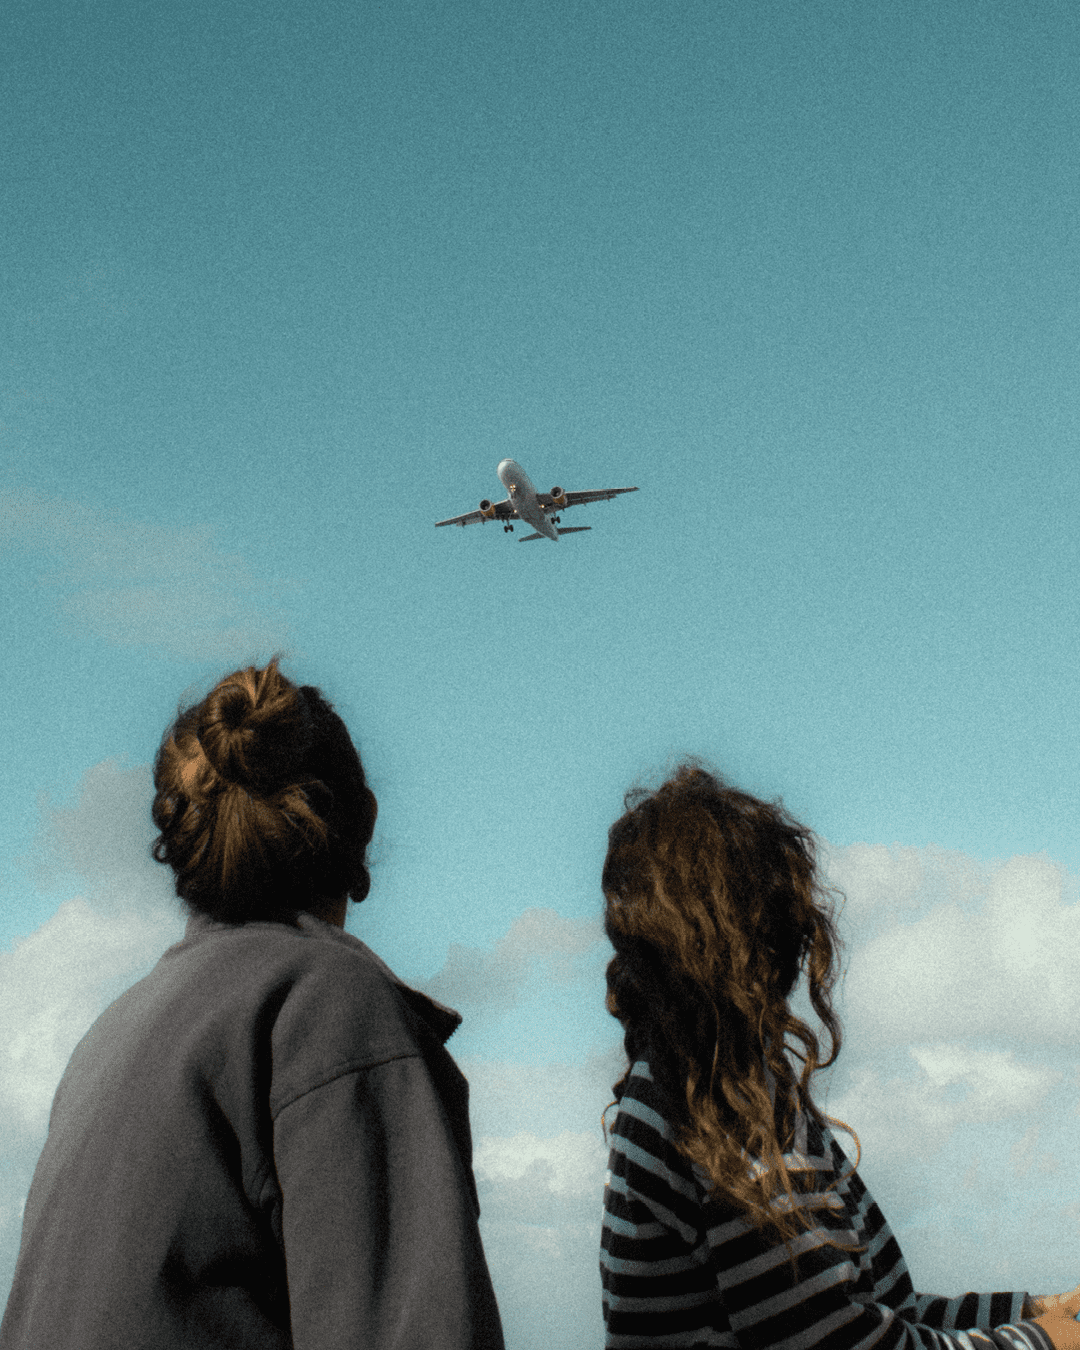 Two people look up at a plane in a blue sky, photography by Juan Goyache